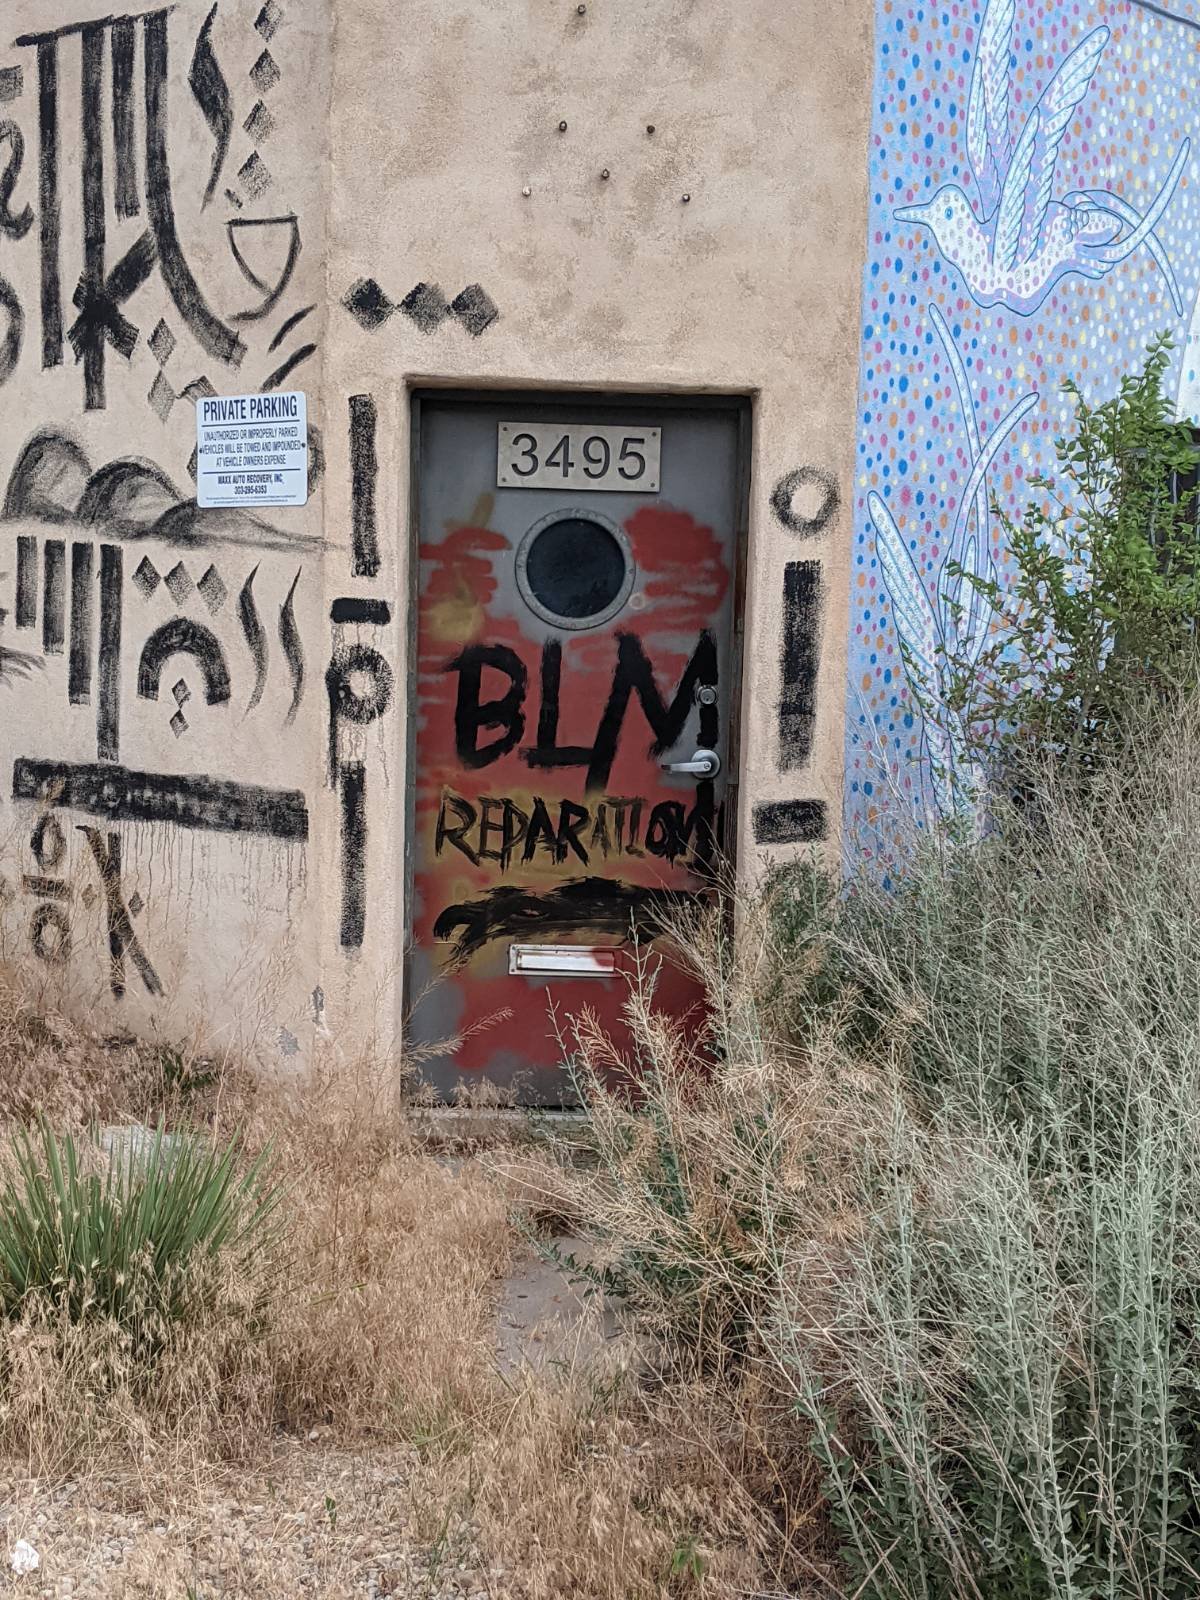 A house with shrubs around it. There is graffiti on the door that reads "BLM" and underneath the graffiti reads "Reparations"